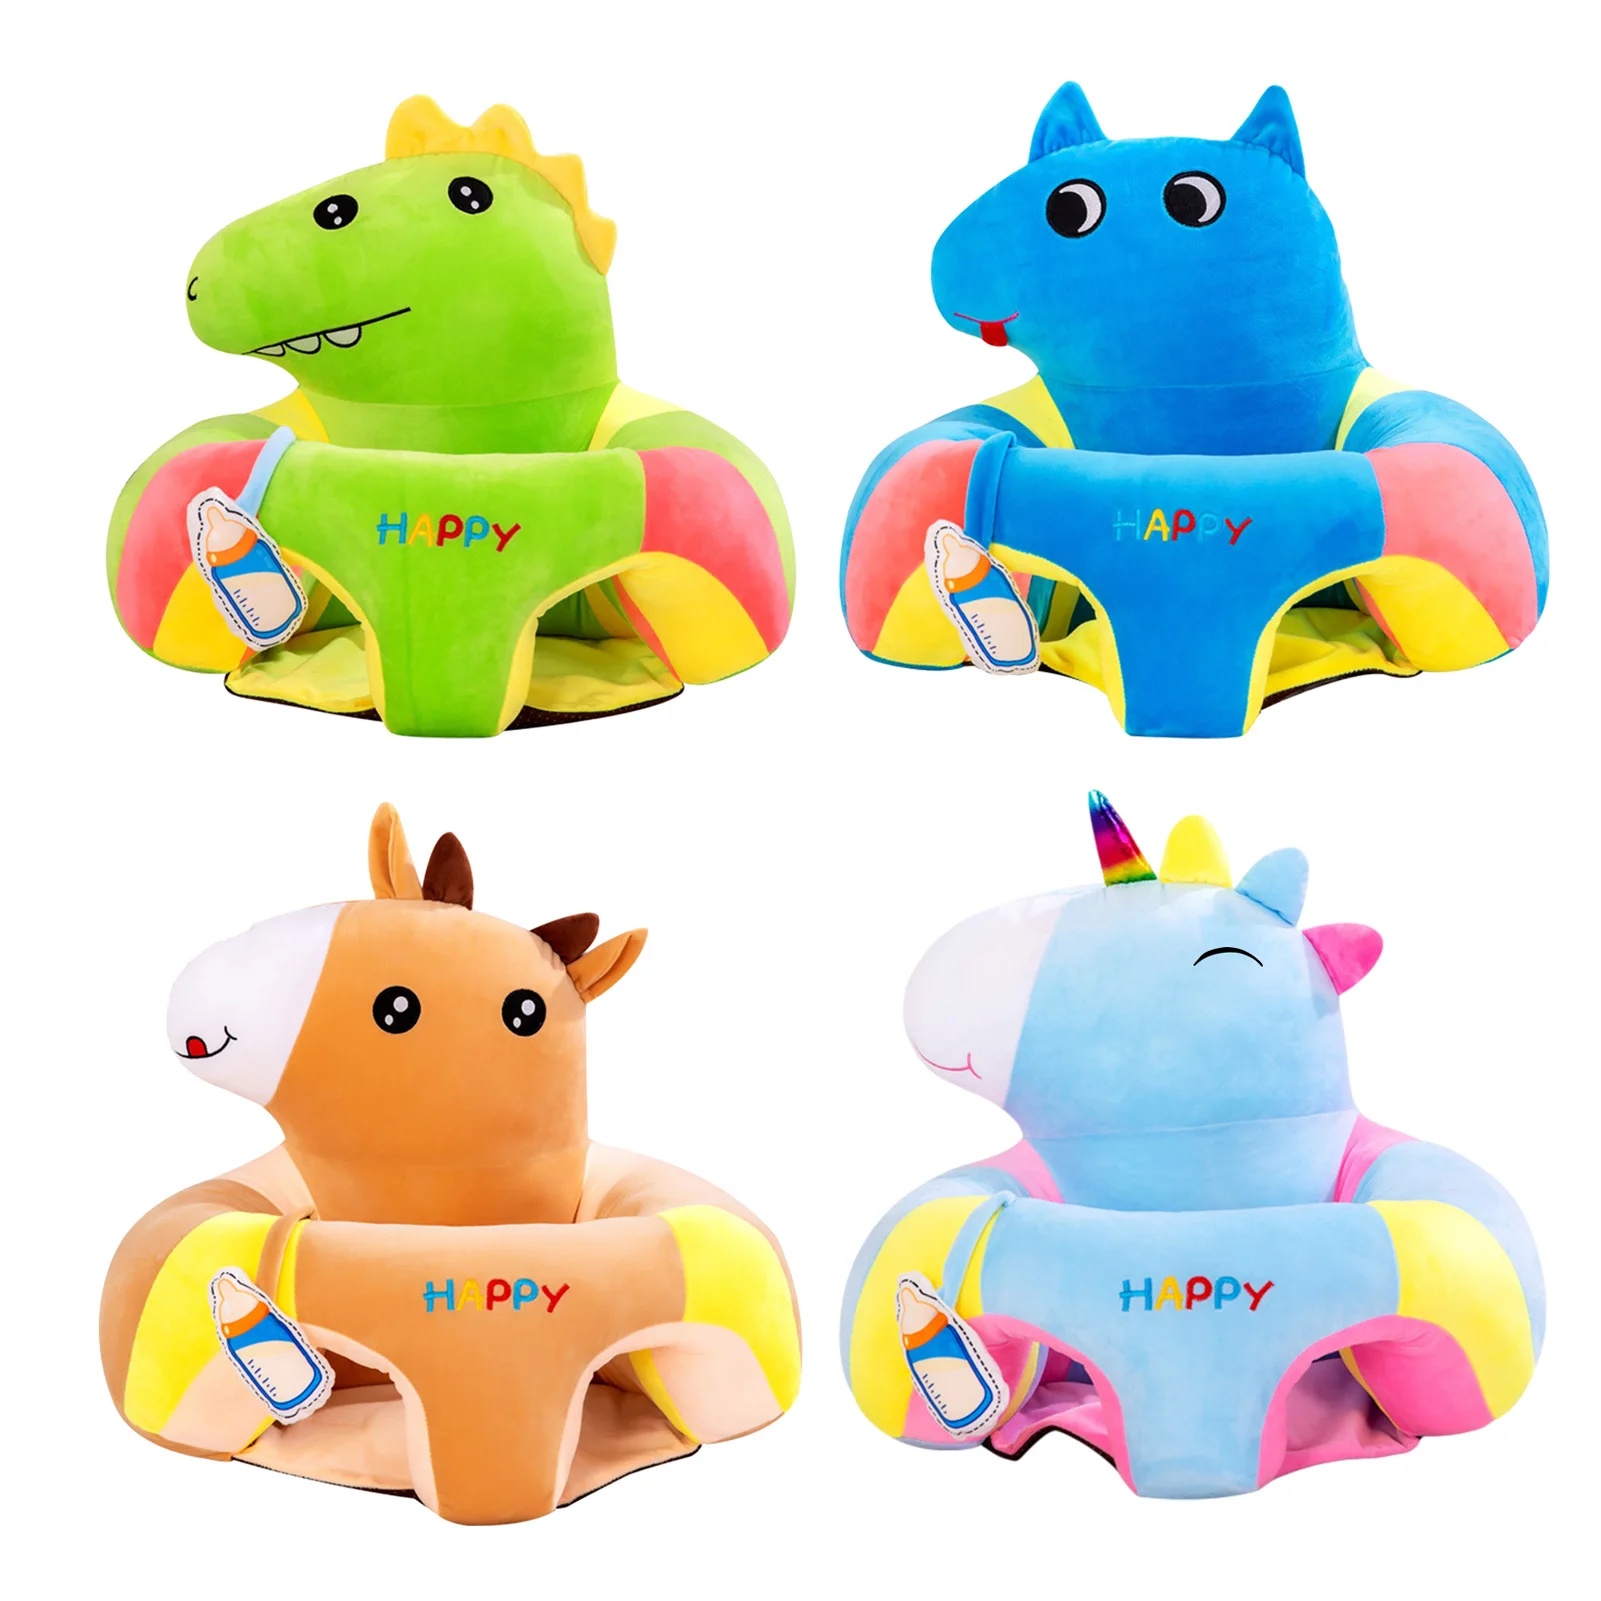 

Baby Seats Sofa Support Cover Infant Learning To Sit Plush Chair Feeding Seat Skin For Toddler Nest Puff Dropshipping PP Cotton